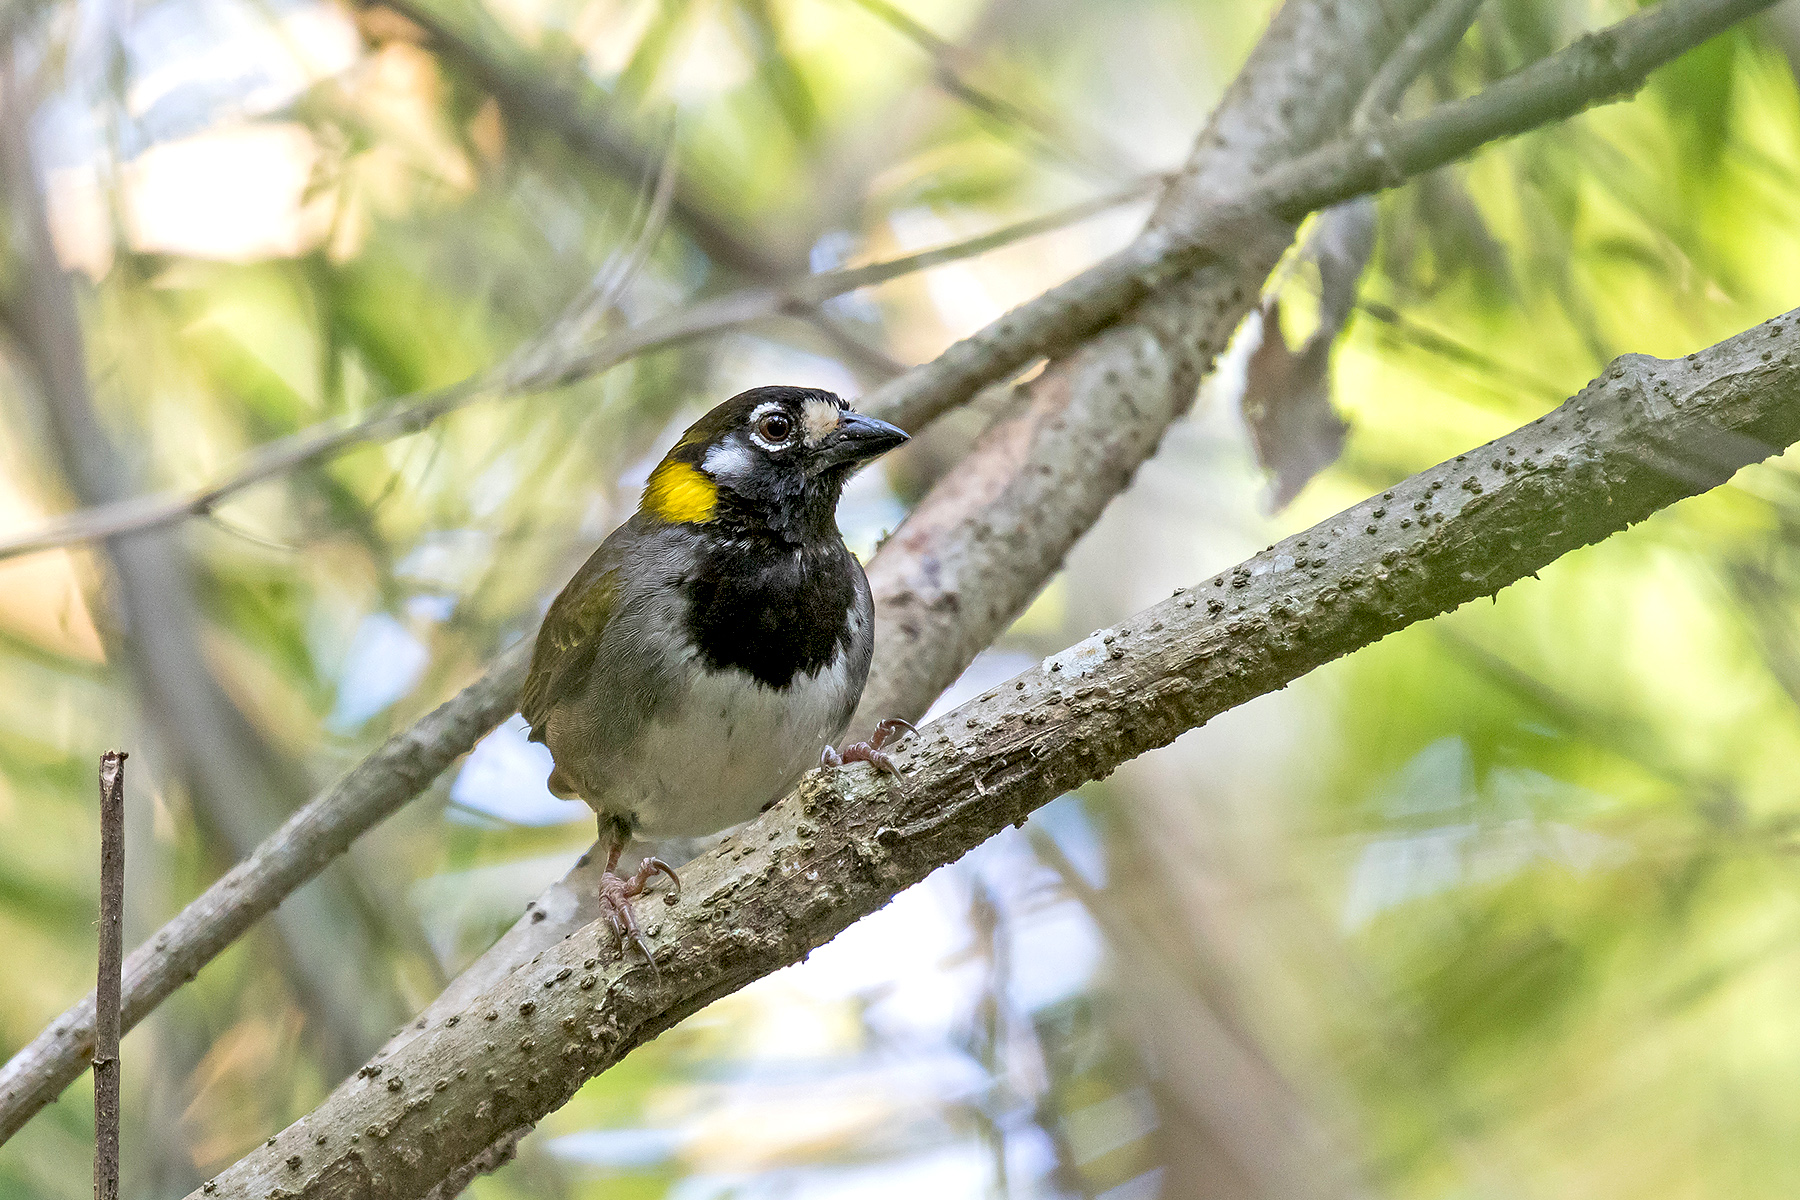 White-eared Ground Sparrow in Costa Rica (image by Pete Morris)